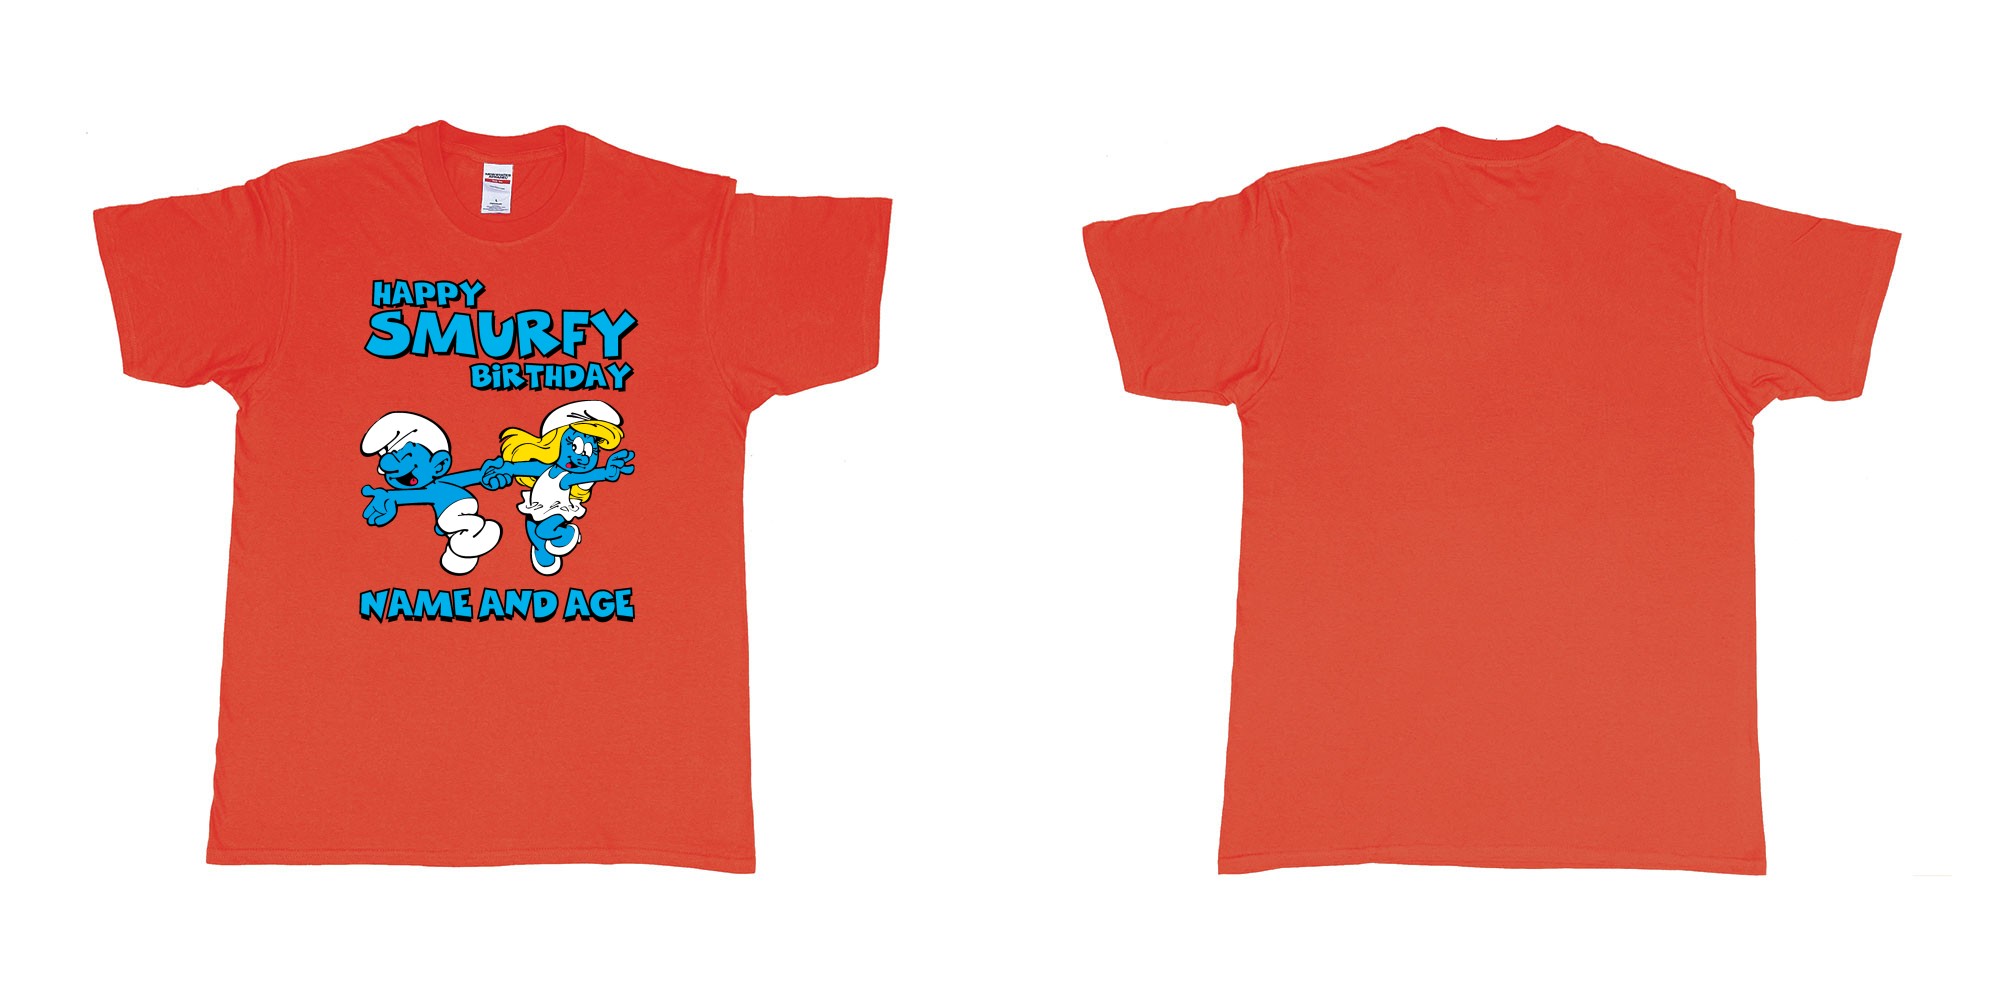 Custom tshirt design happy smurfy birthday in fabric color red choice your own text made in Bali by The Pirate Way